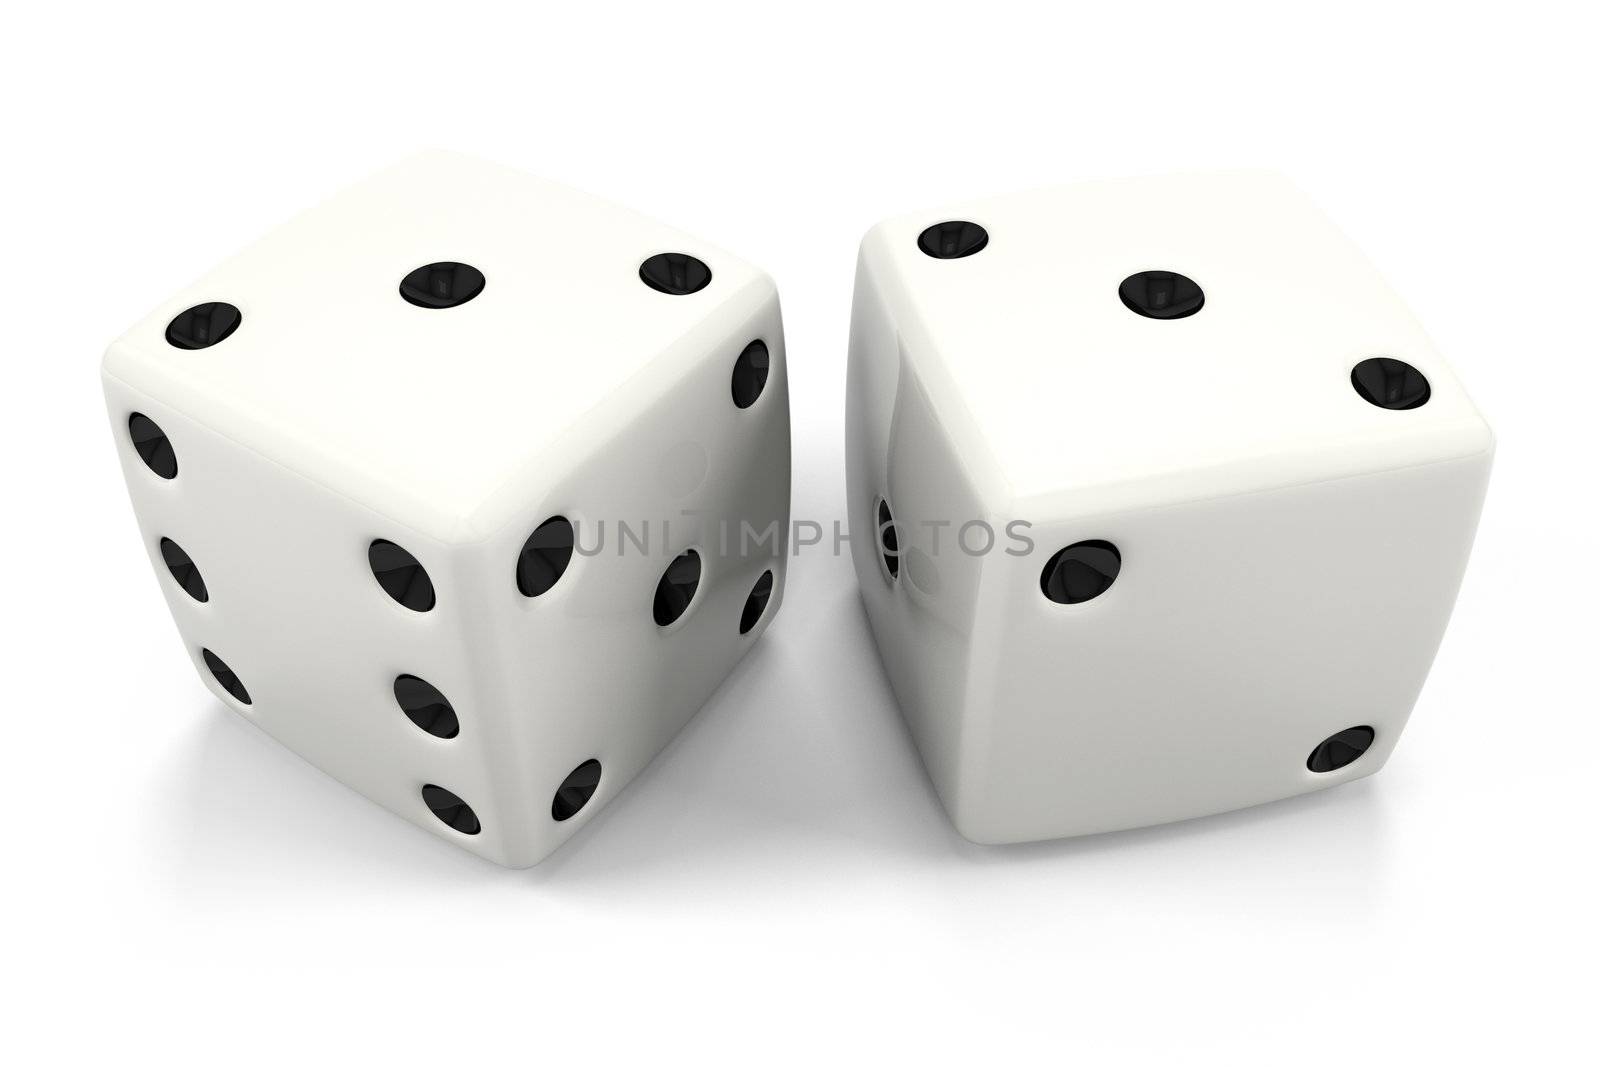 Two Dice by LeoBlanchette